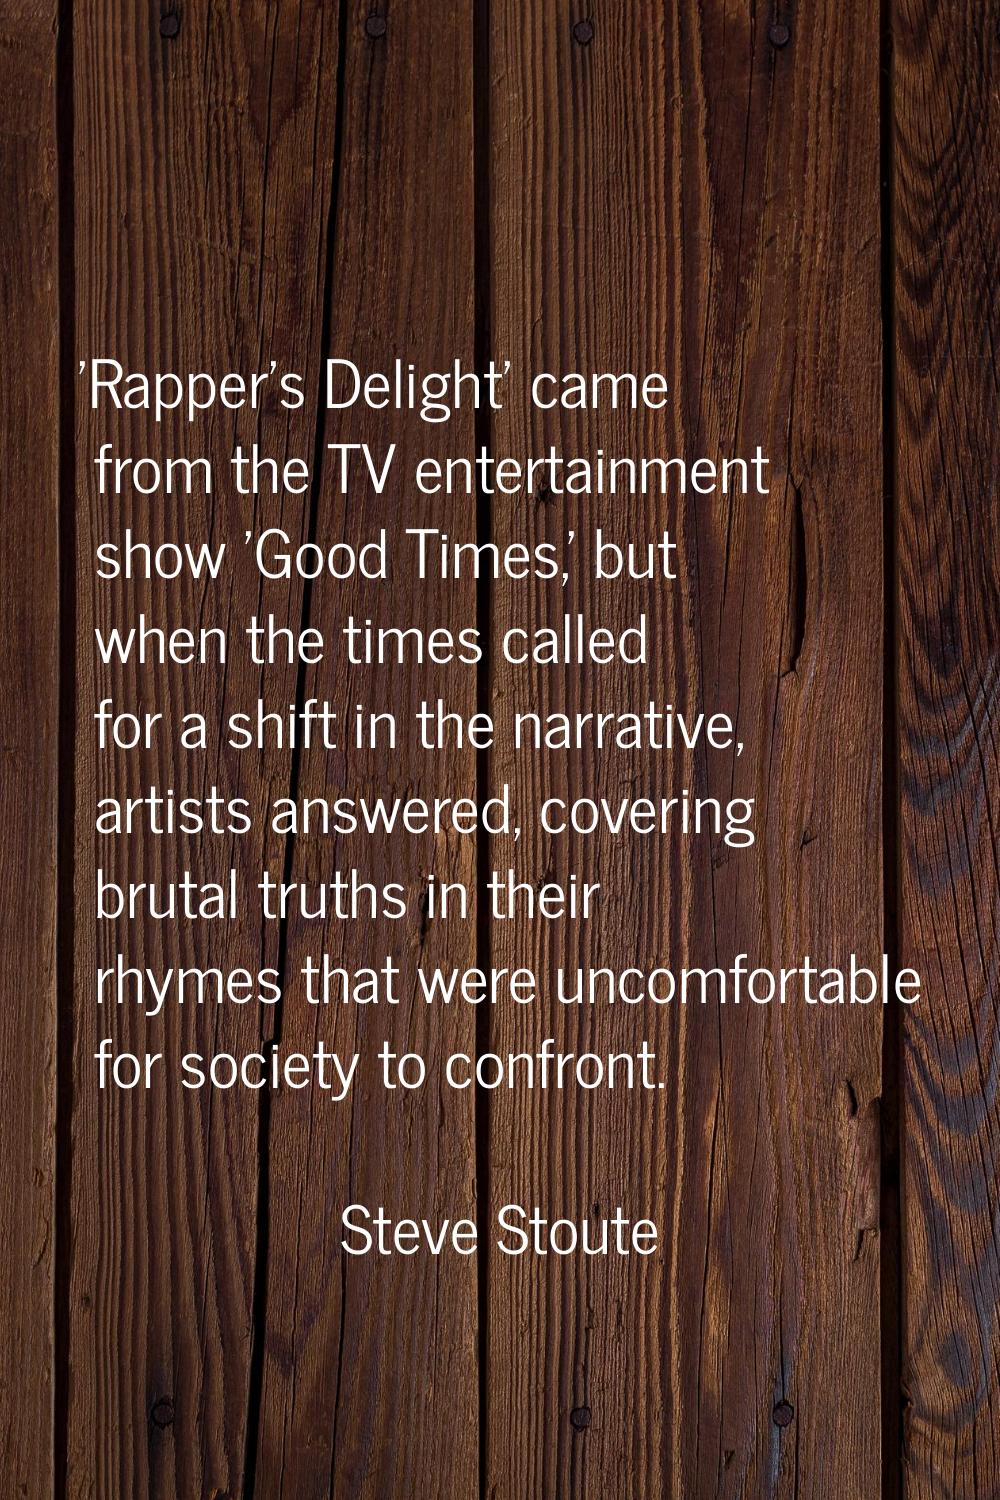 'Rapper's Delight' came from the TV entertainment show 'Good Times,' but when the times called for 